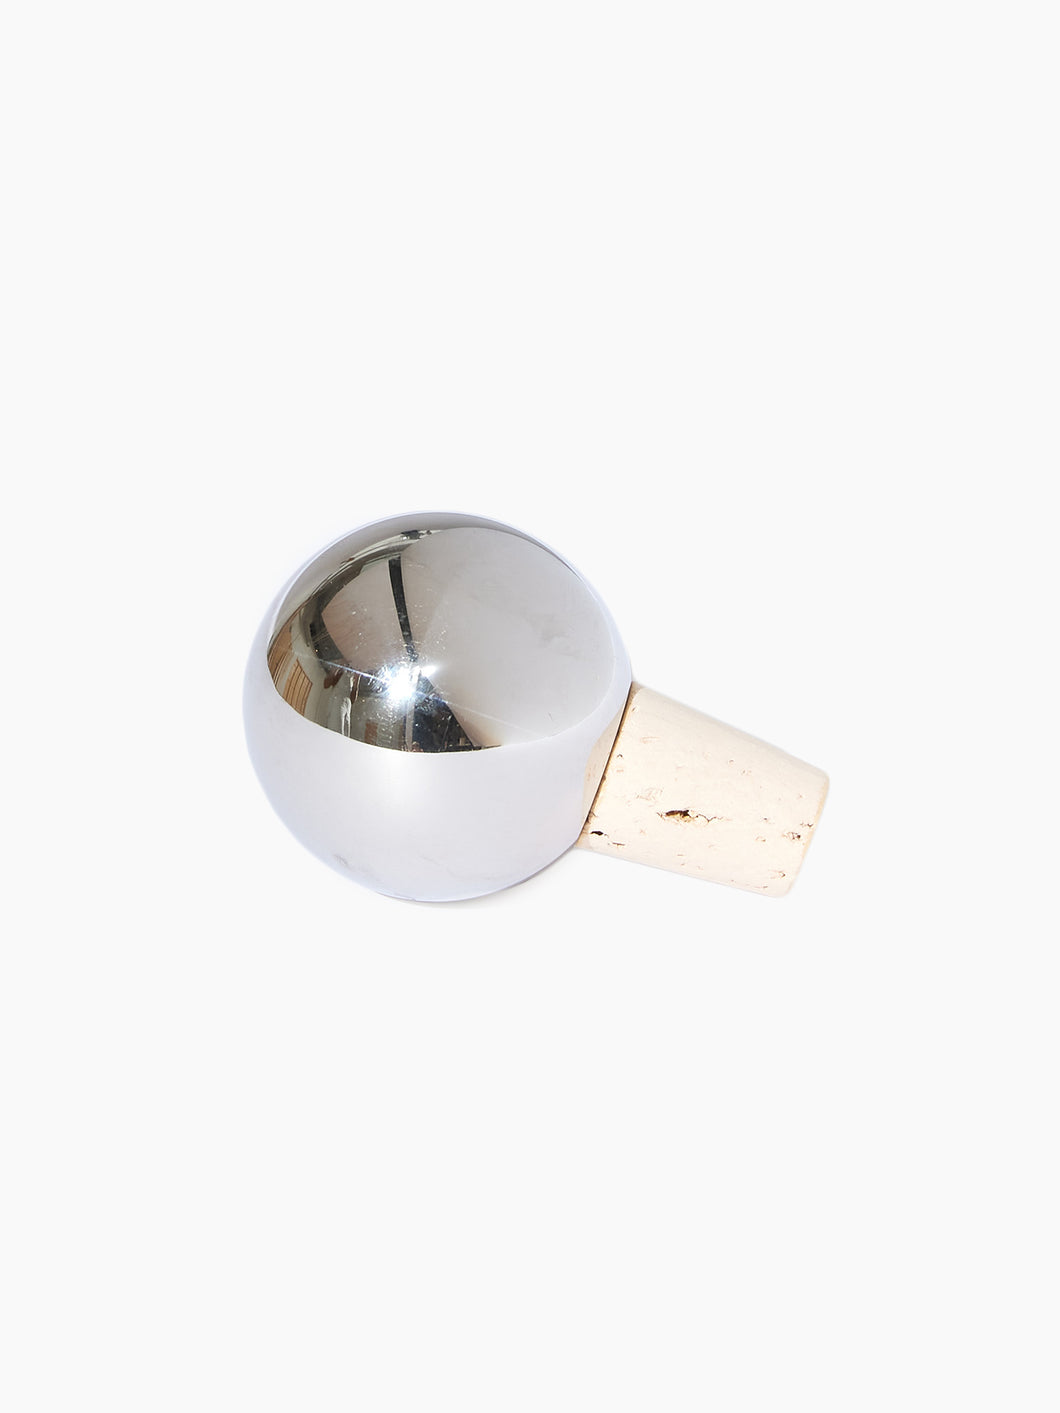 Stainless Steel Round Wine Stopper